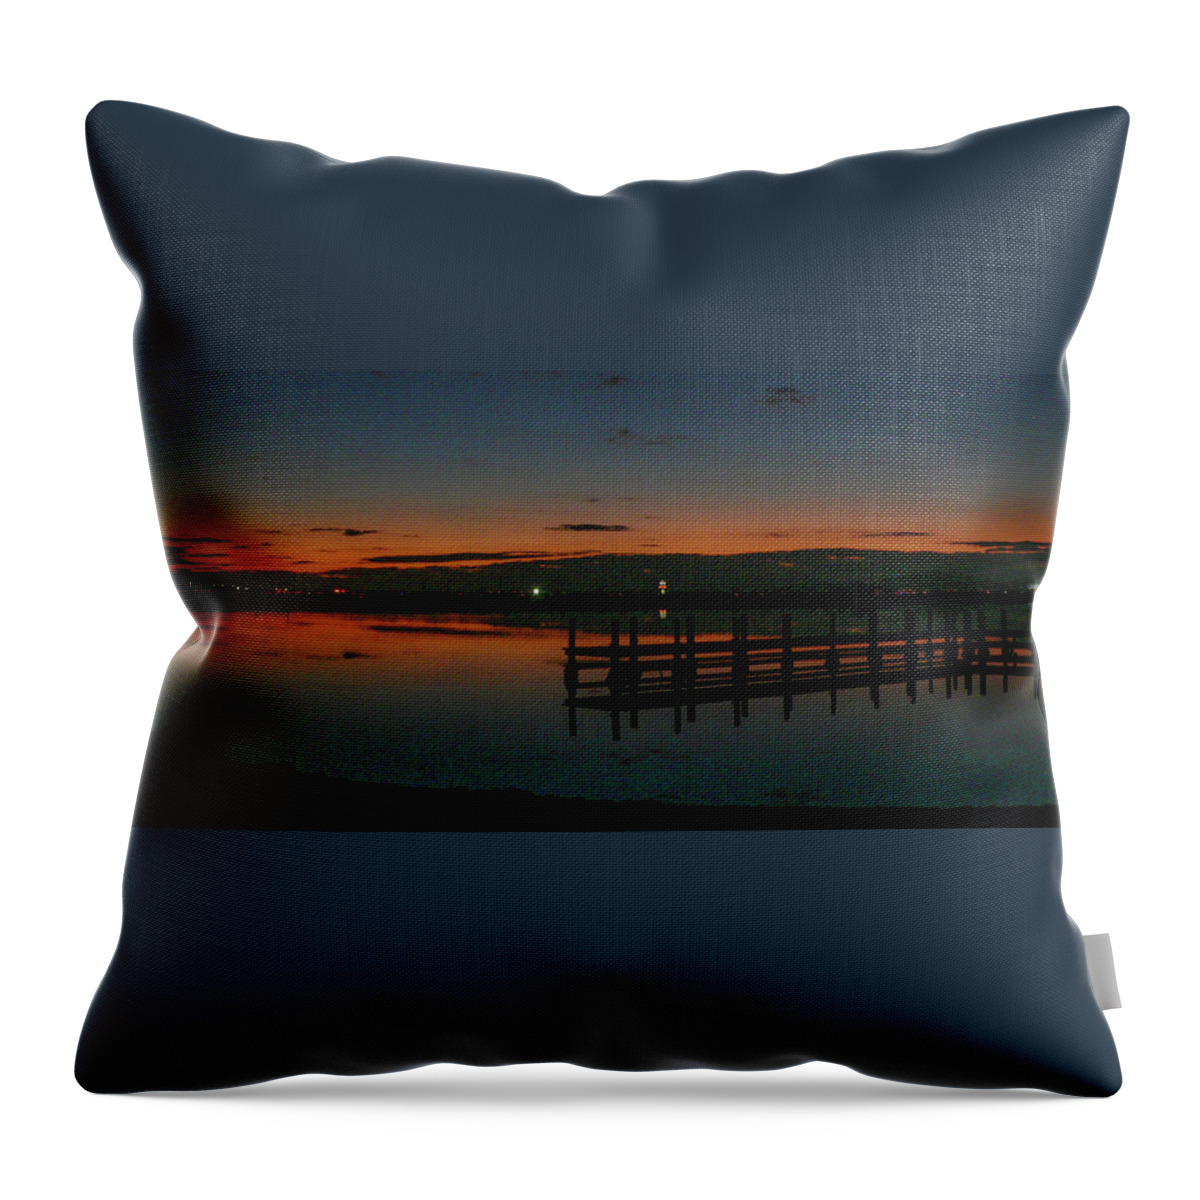 Orcinusfotograffy Throw Pillow featuring the photograph Firebird Dawn by Kimo Fernandez